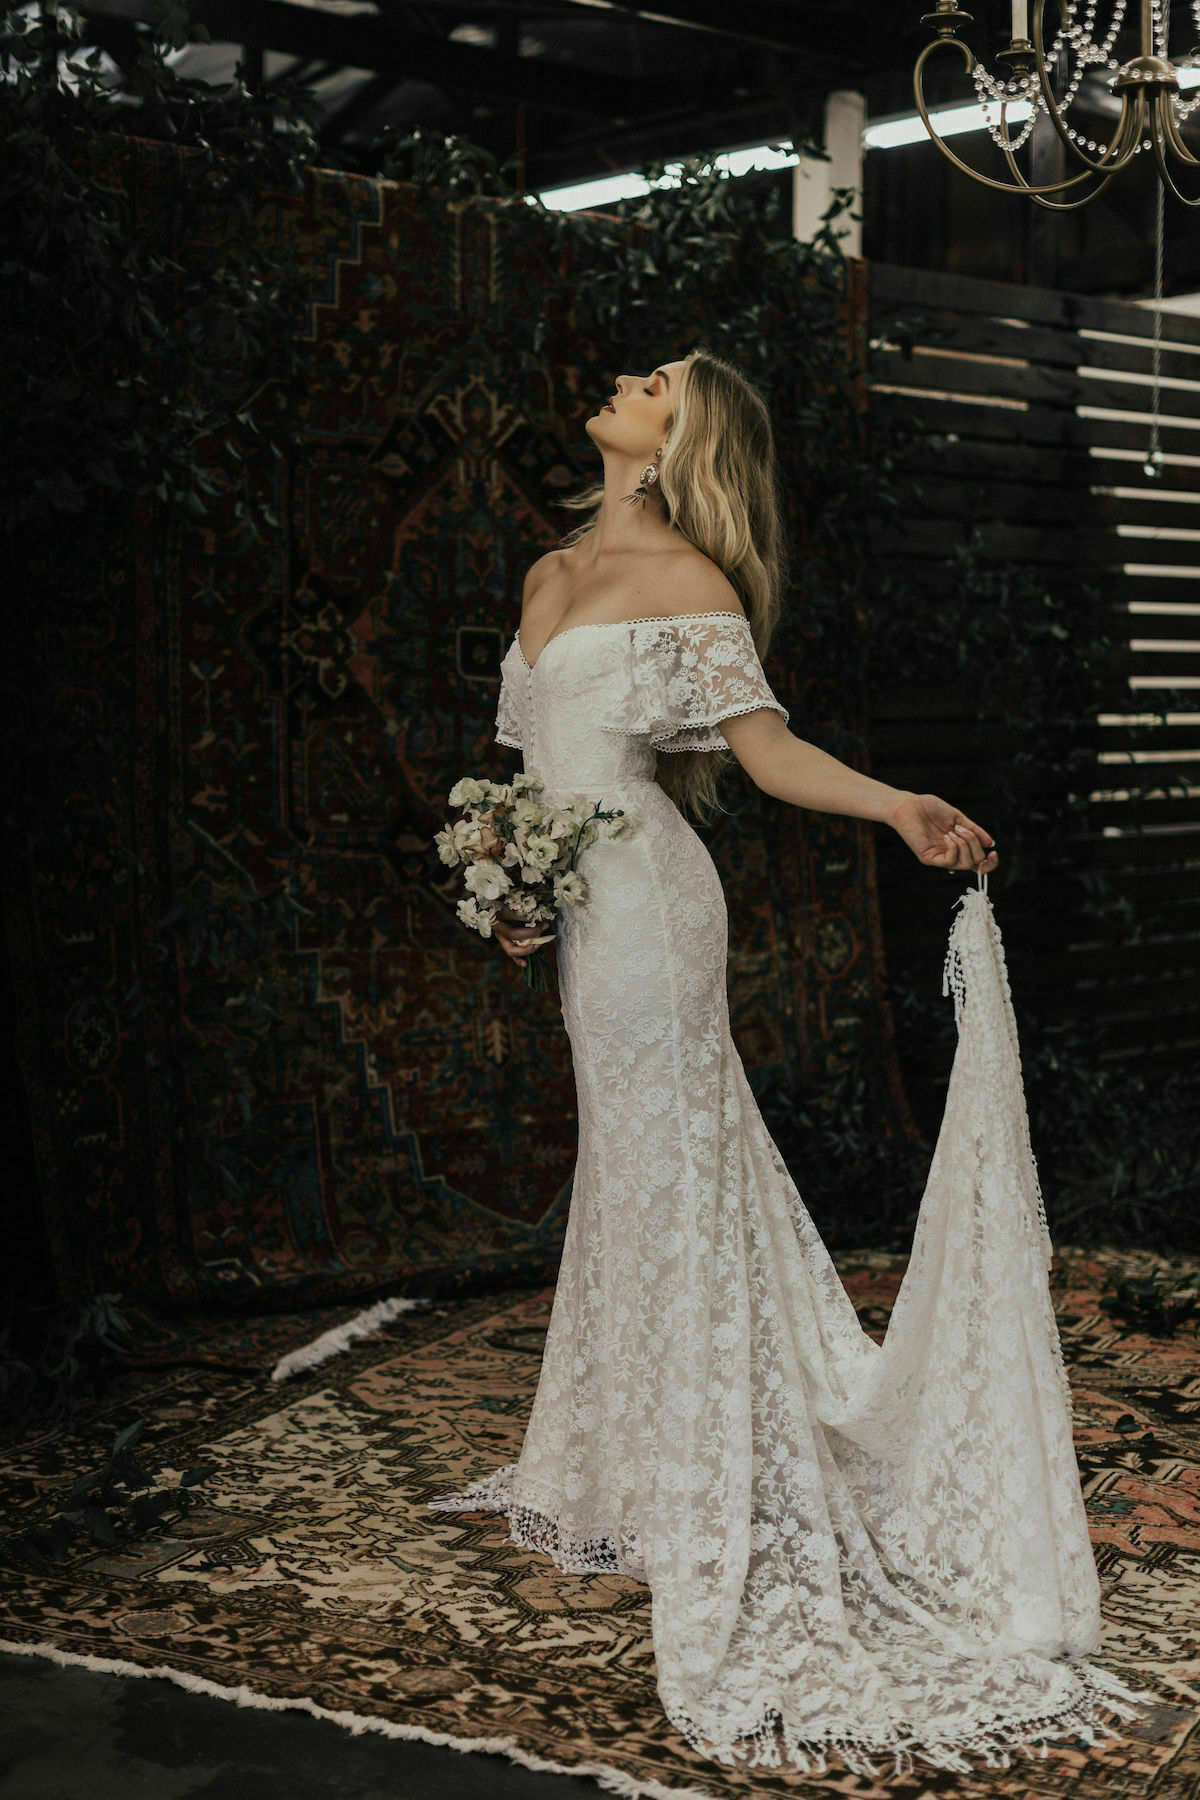 Willow Lace Wedding Dress